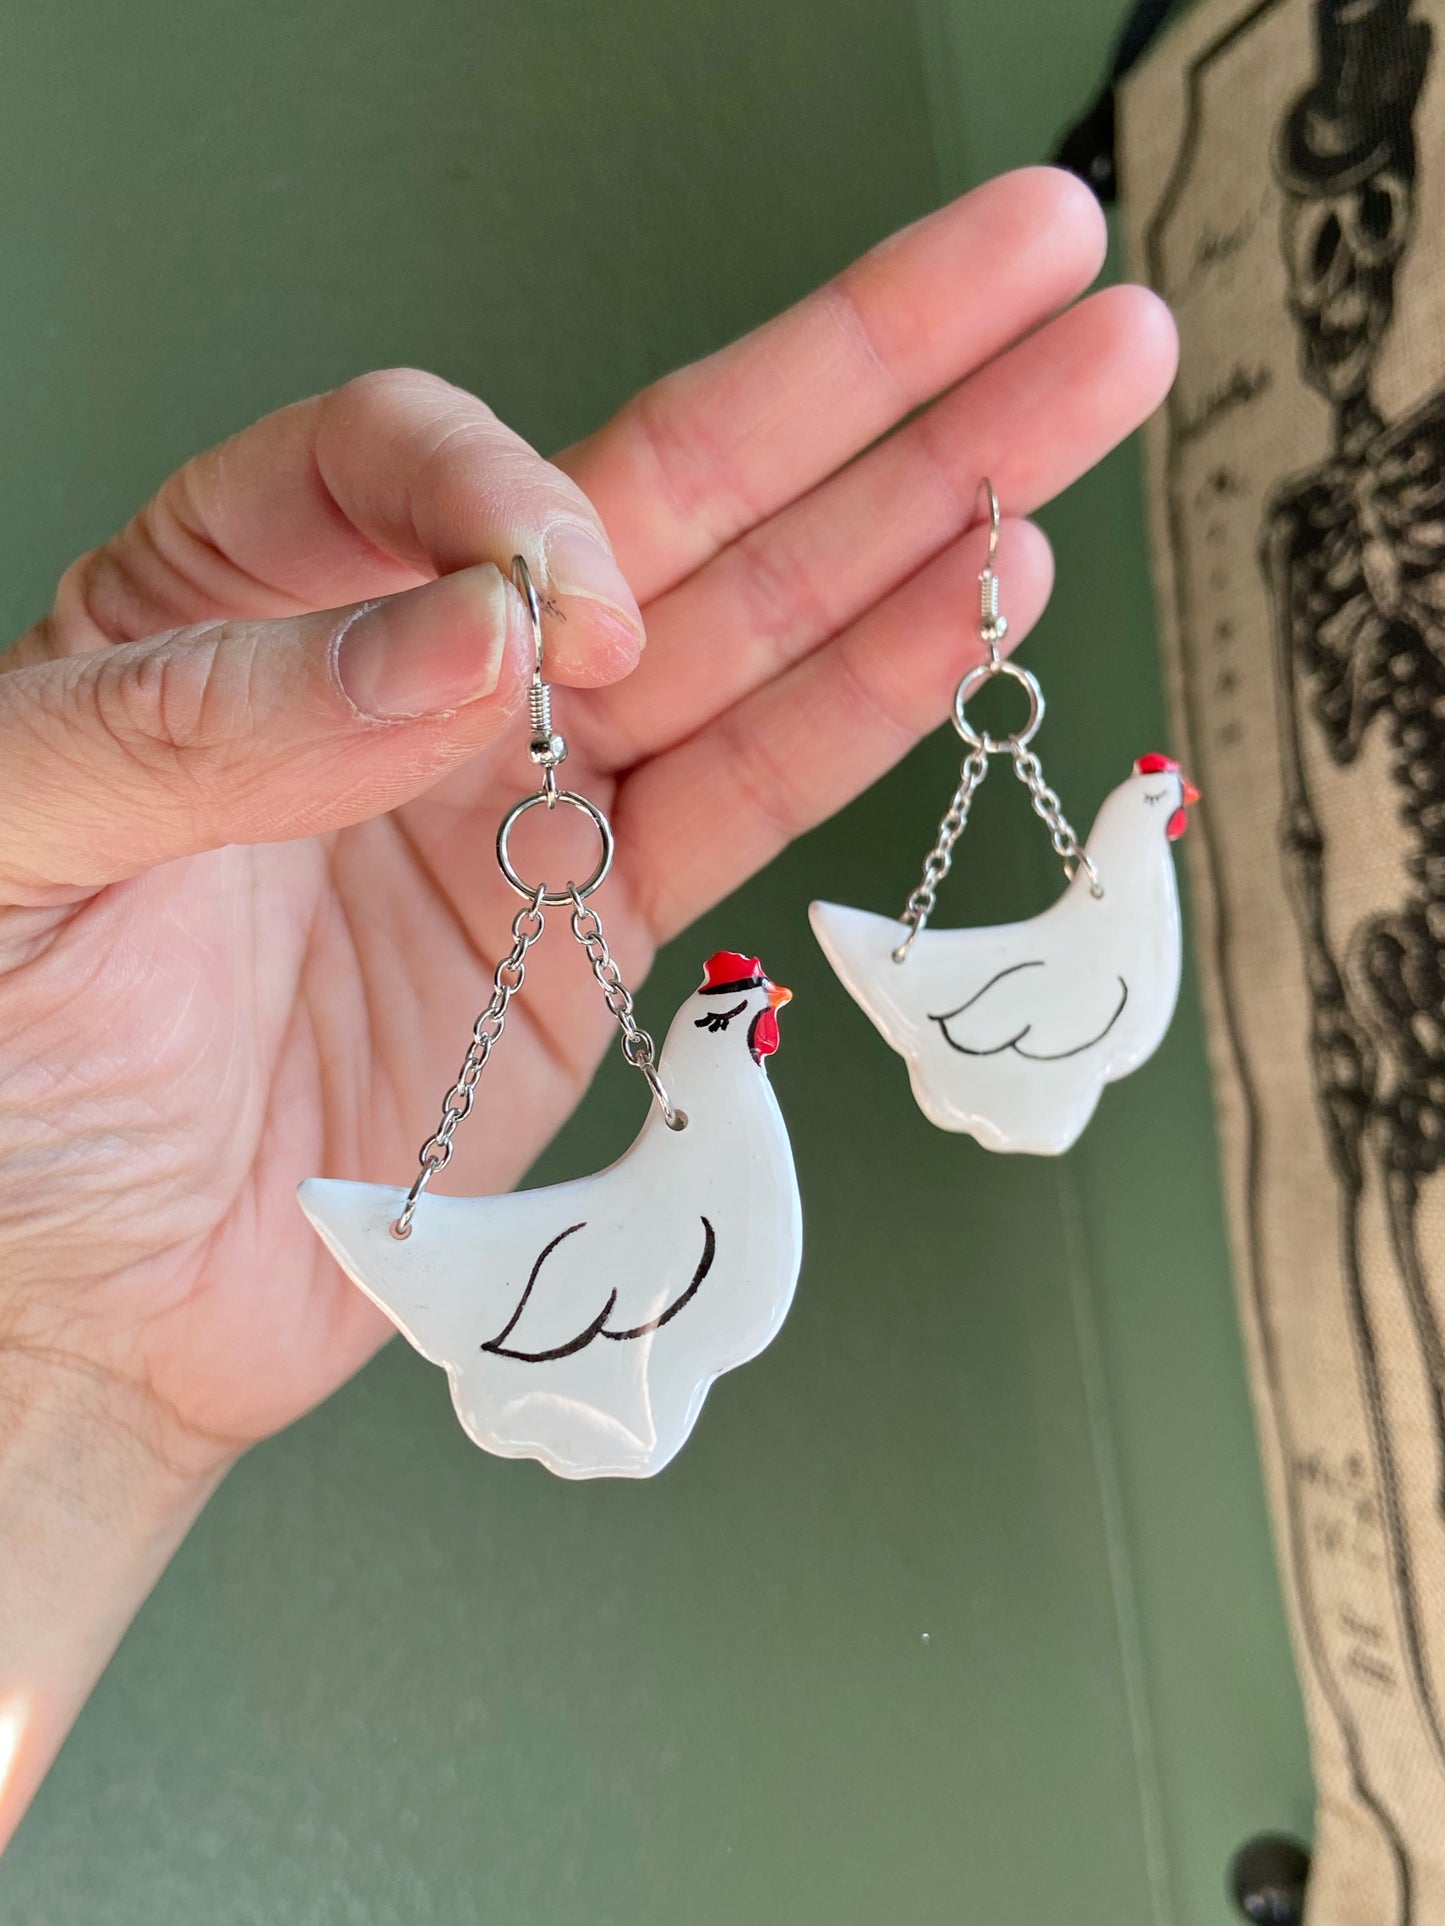 Flying Chickens - Handpainted polymer clay chicken earrings with stainless steel chain